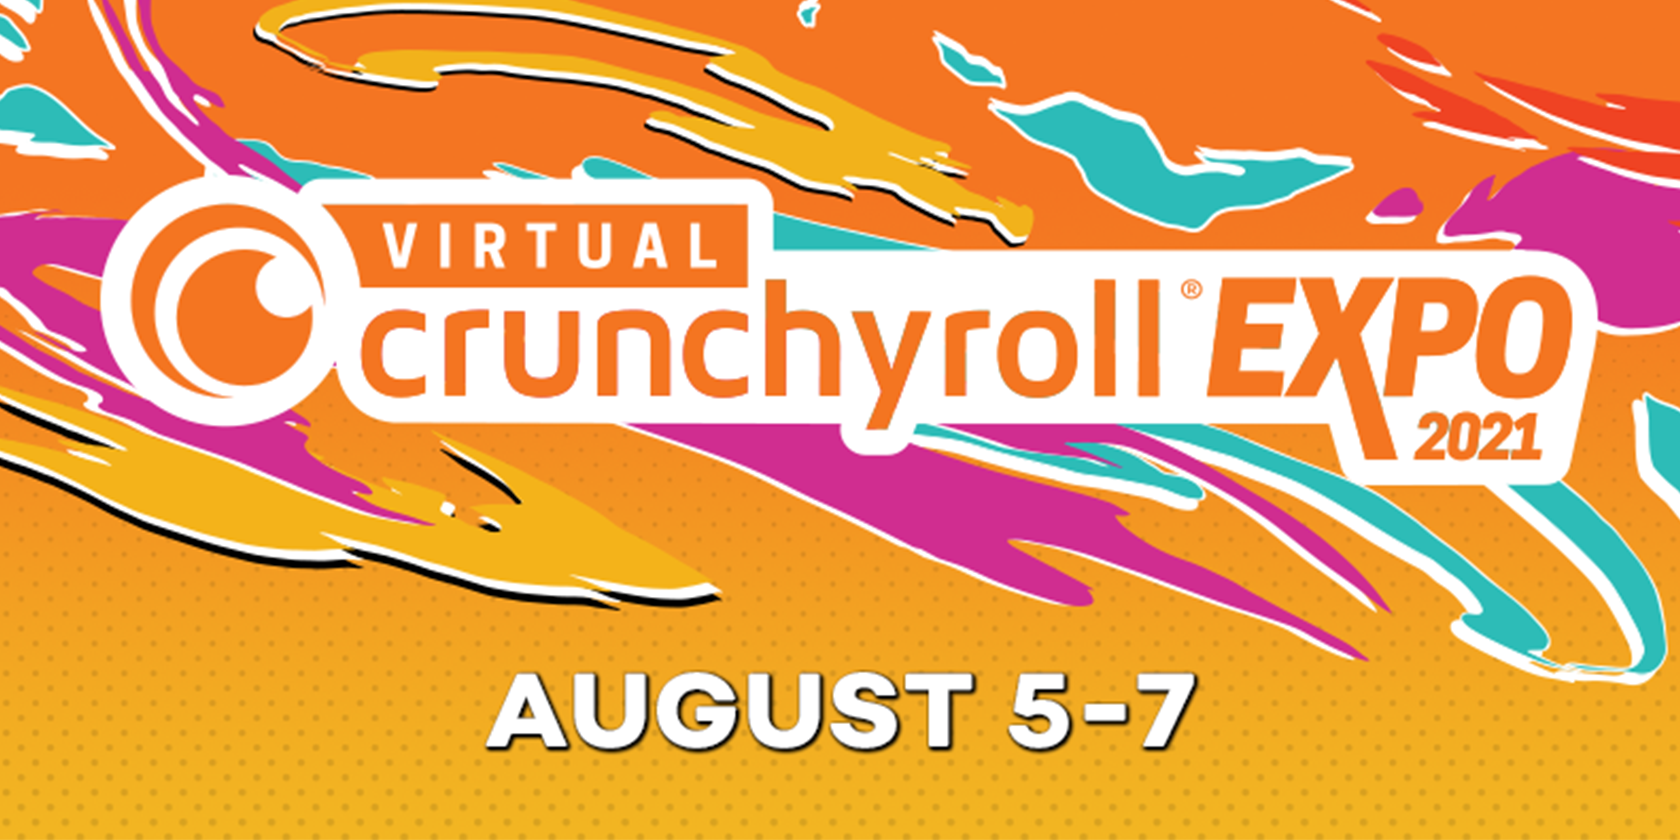 Register Now for Crunchyroll Expo, Which Is Going Virtual Again This Year